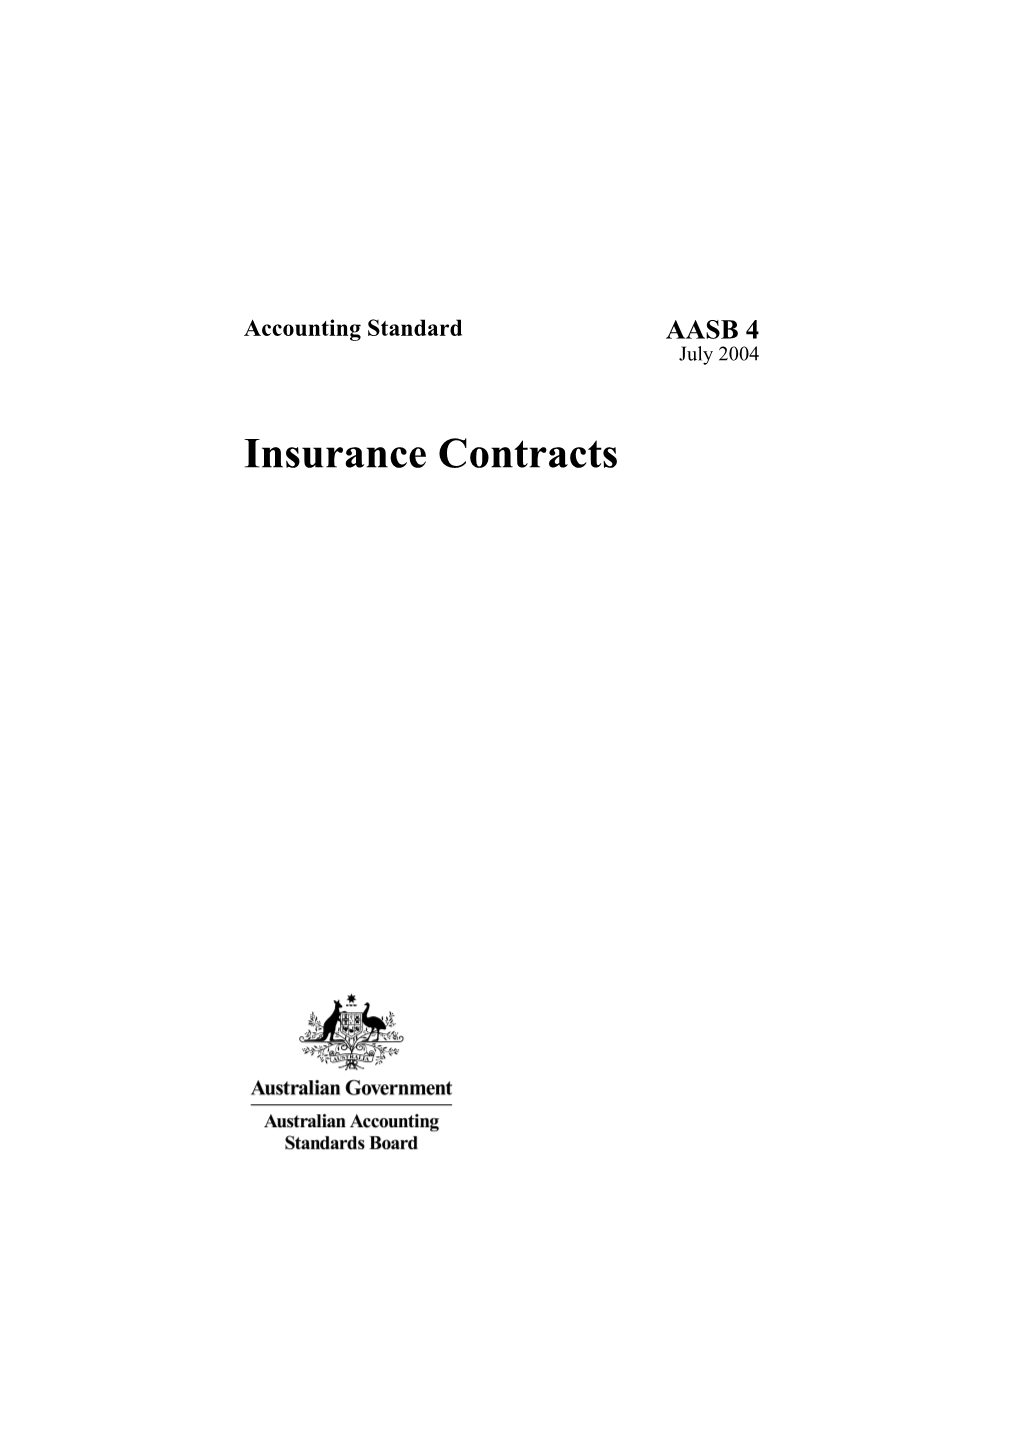 AASB 4 Insurance Contracts